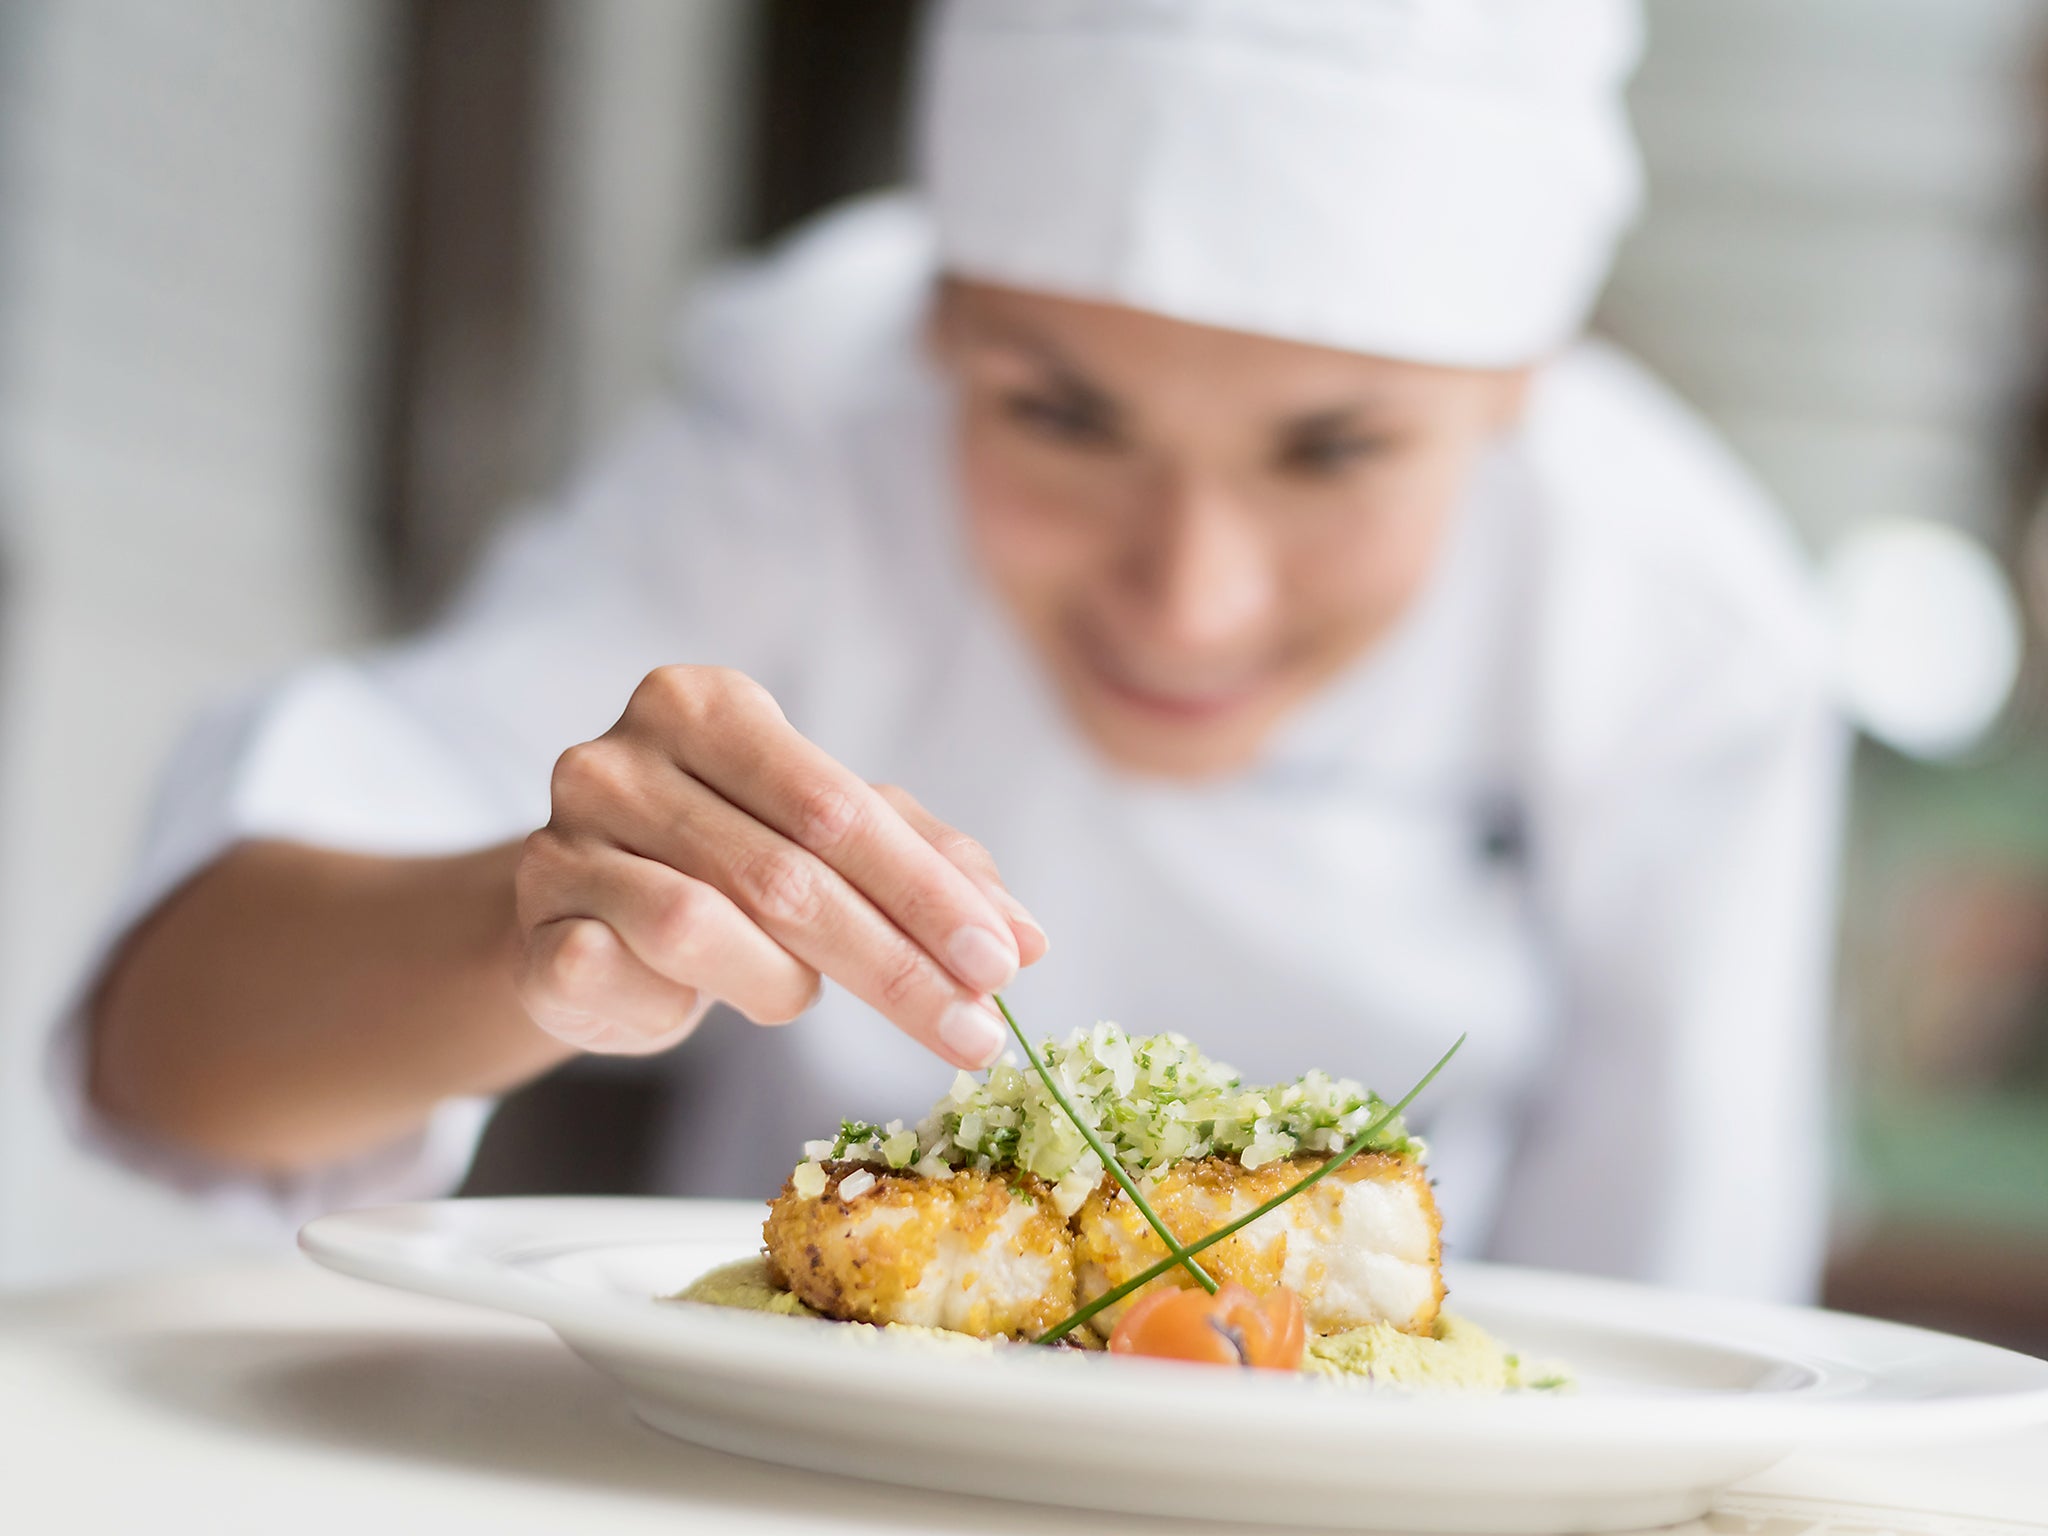 5. "Blonde and Bold: Female Chefs Making Their Mark in the Kitchen" - wide 4